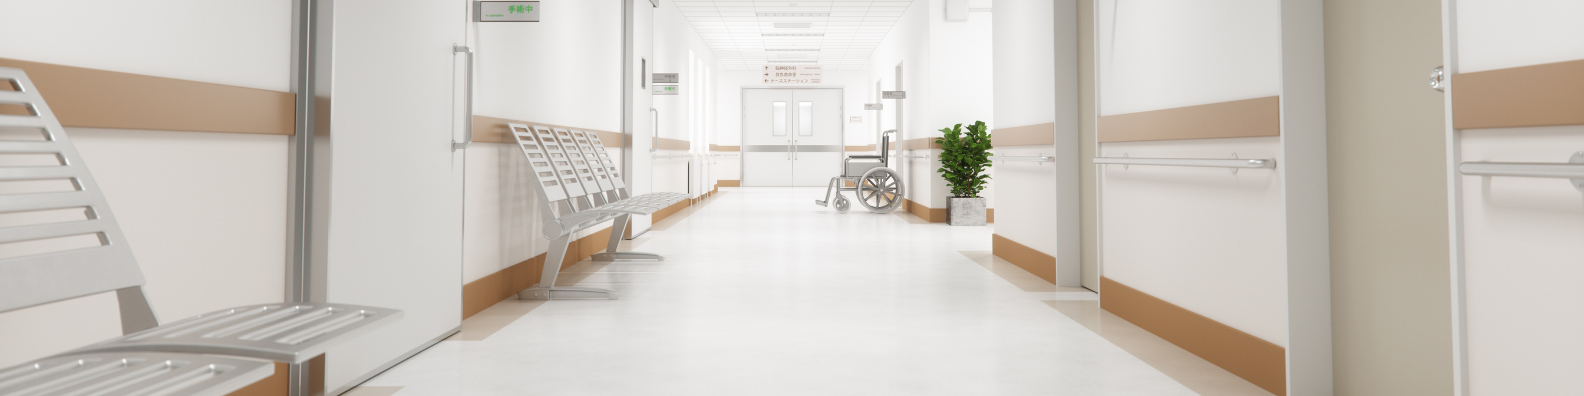 A bright and airy hospital hallway. 